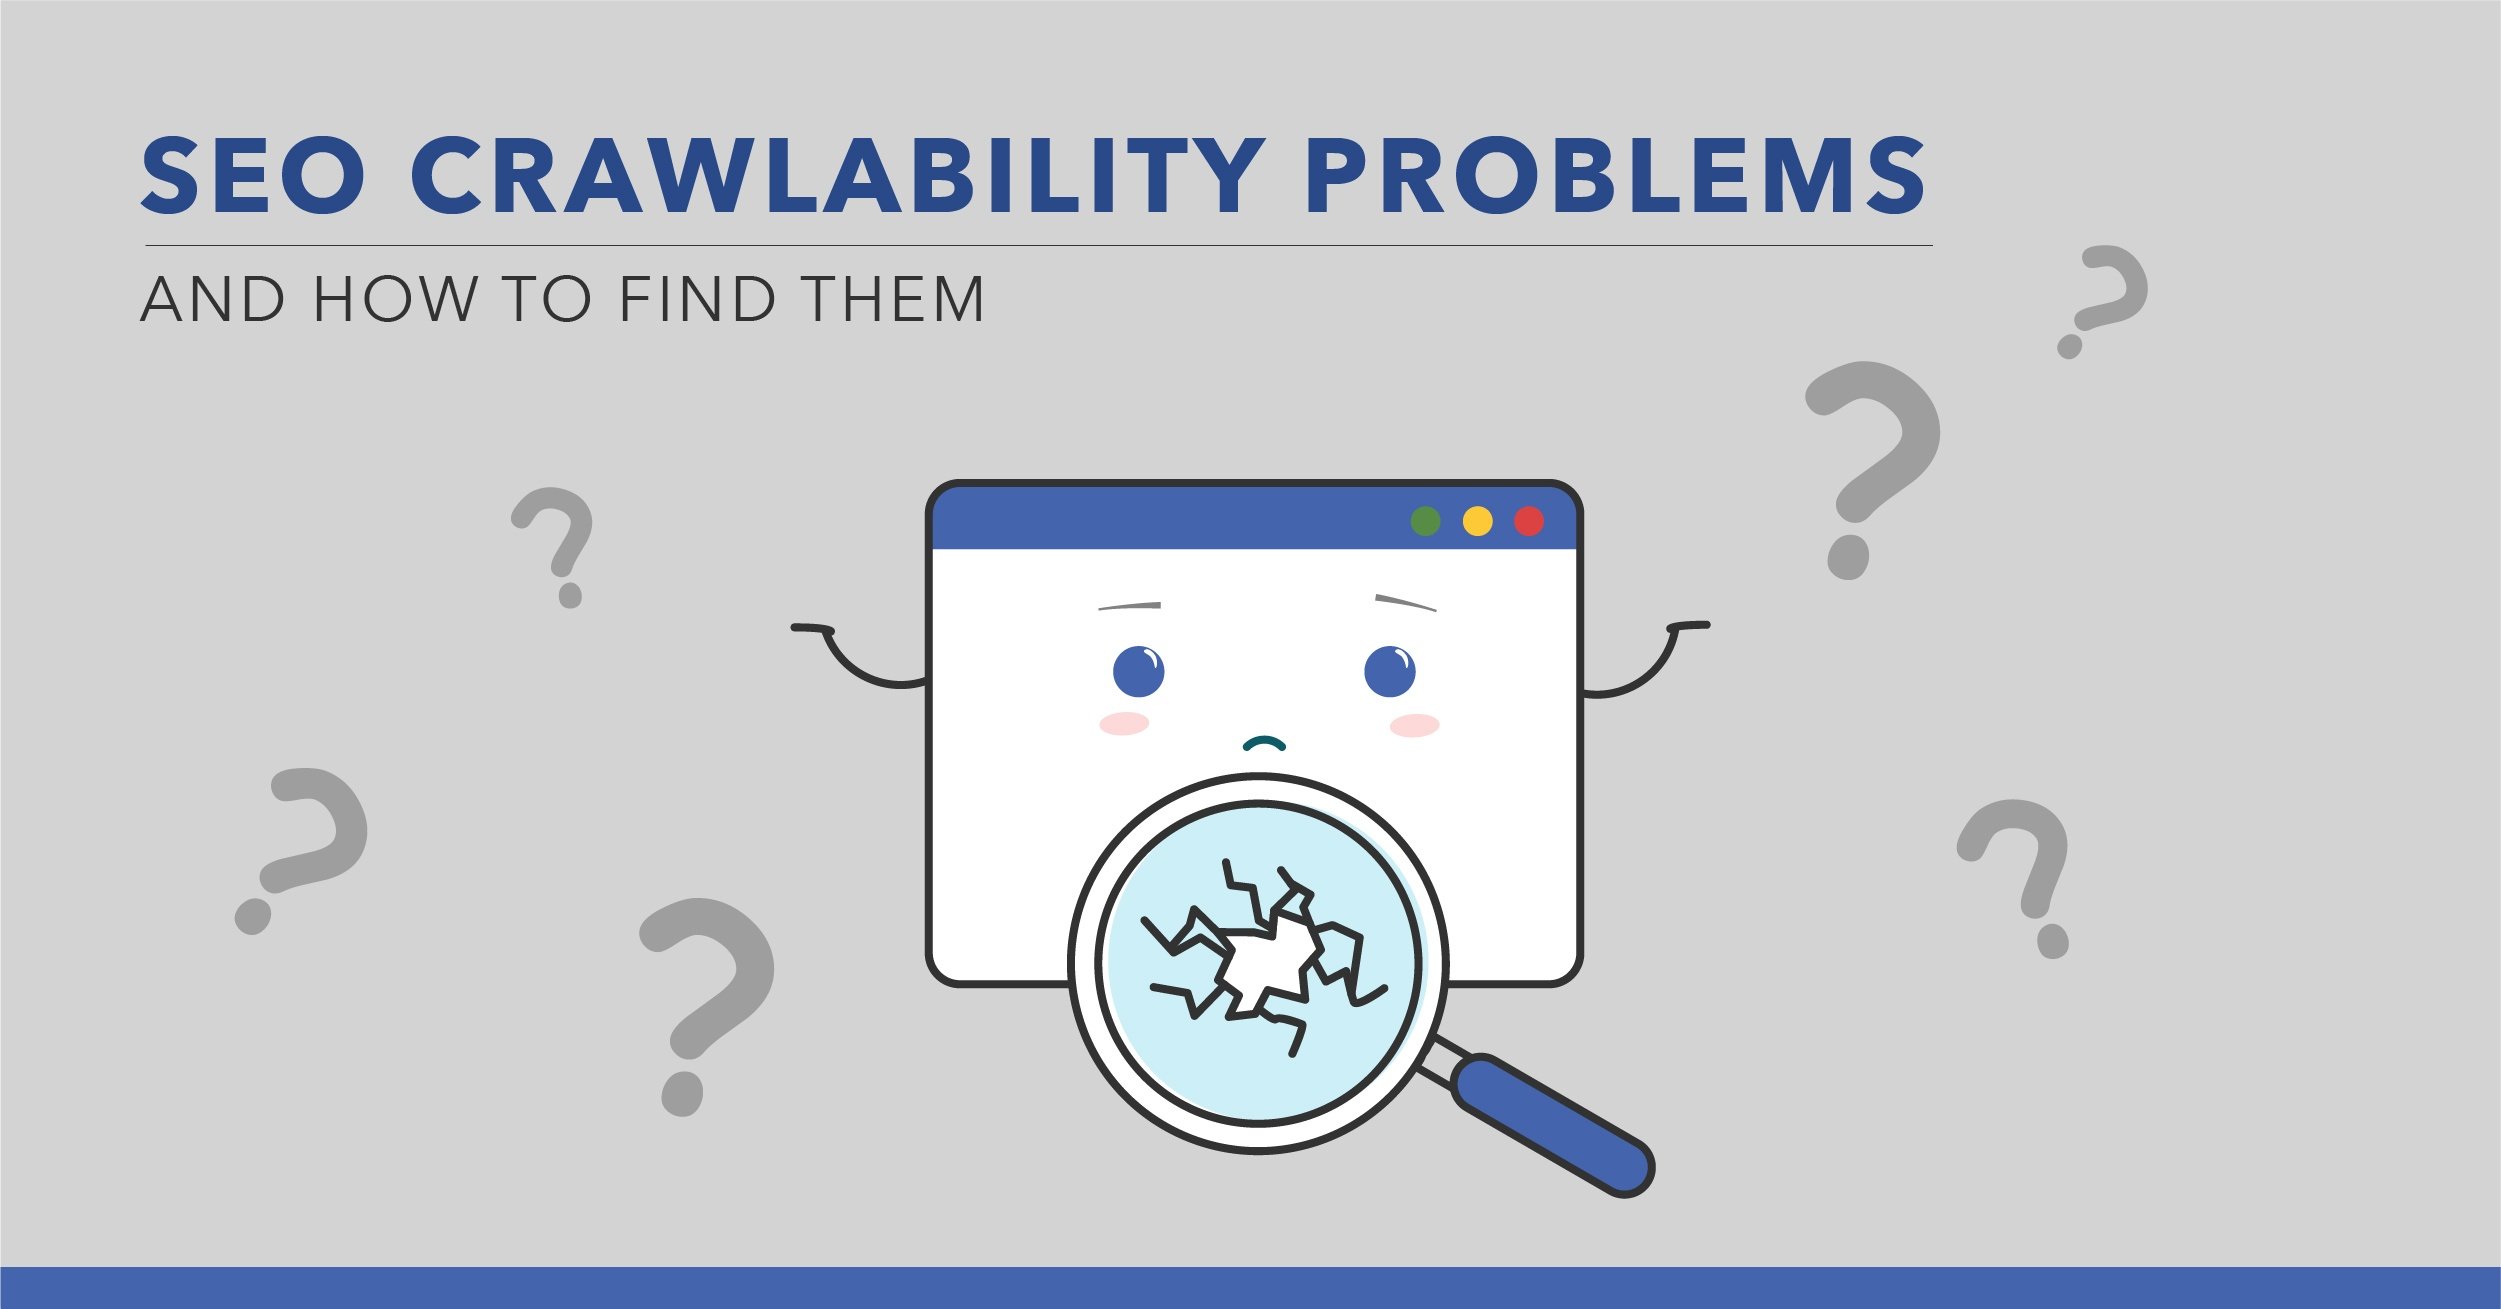 8 Crawlability Problems That Are Hurting Your SEO